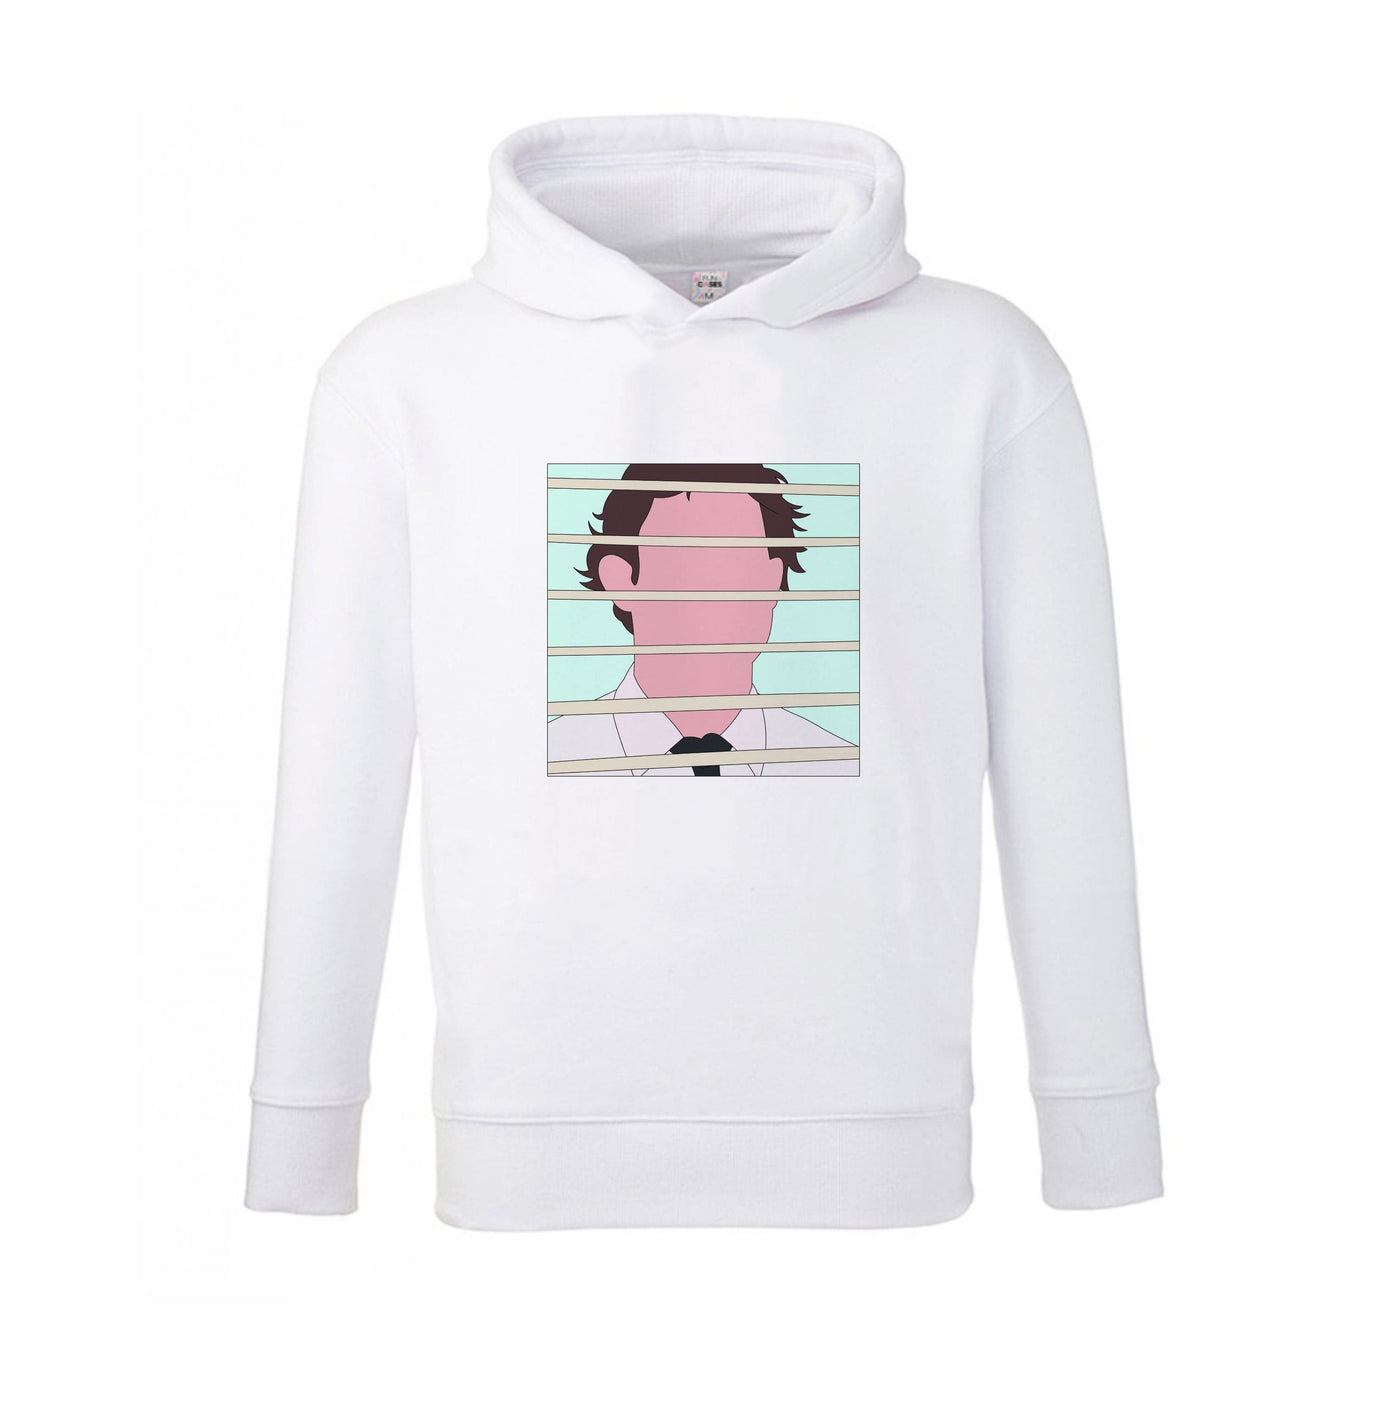 Jim Through The Blinds - The Office Kids Hoodie